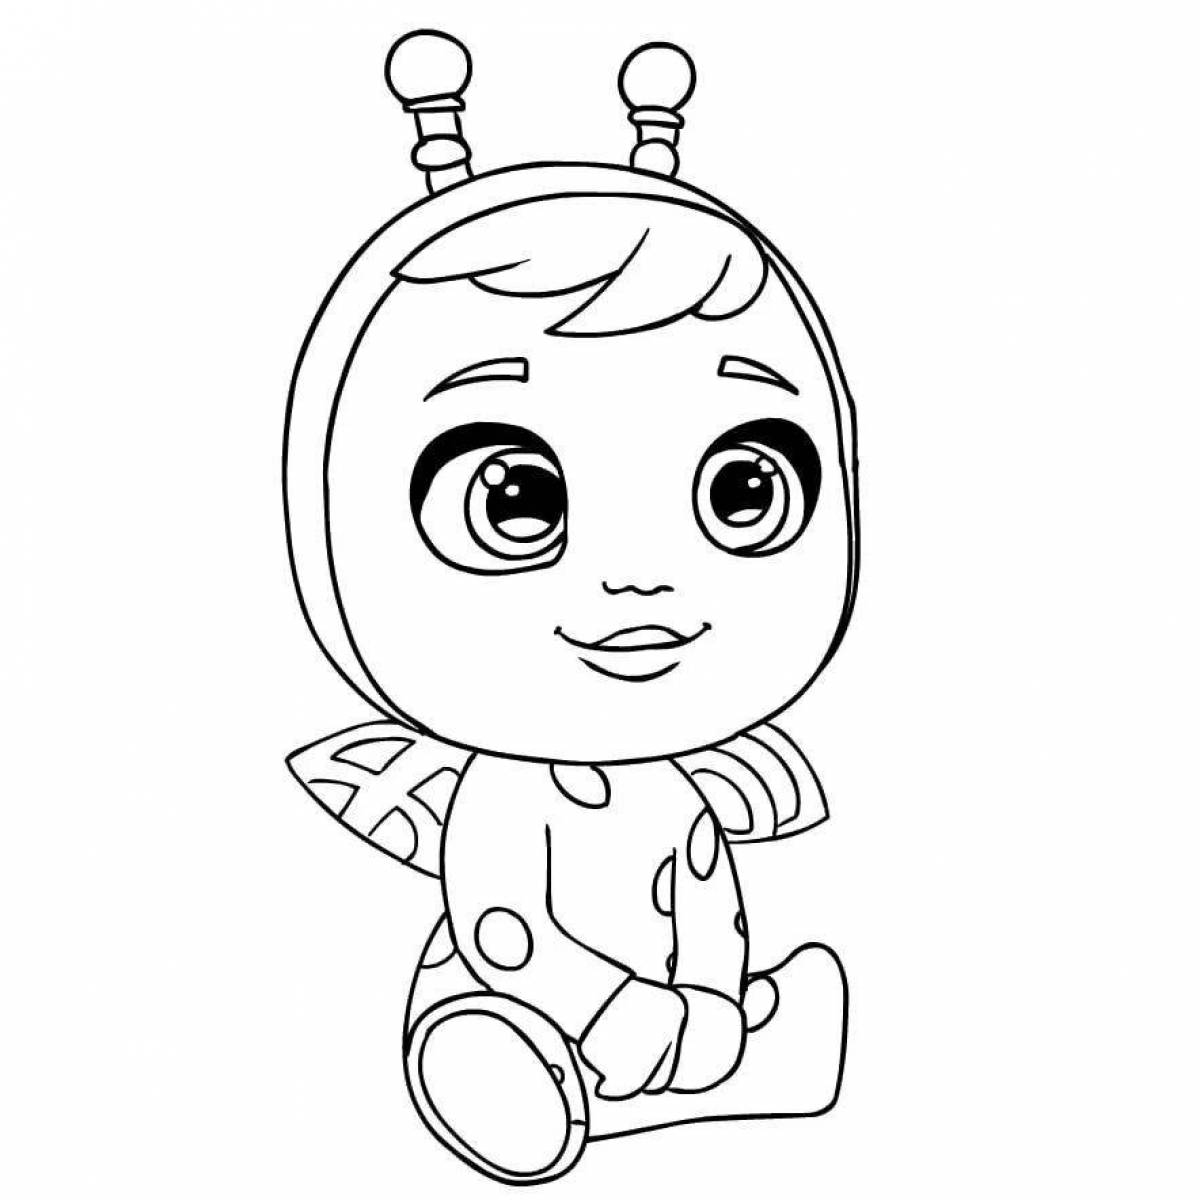 Coloring book magical crybaby